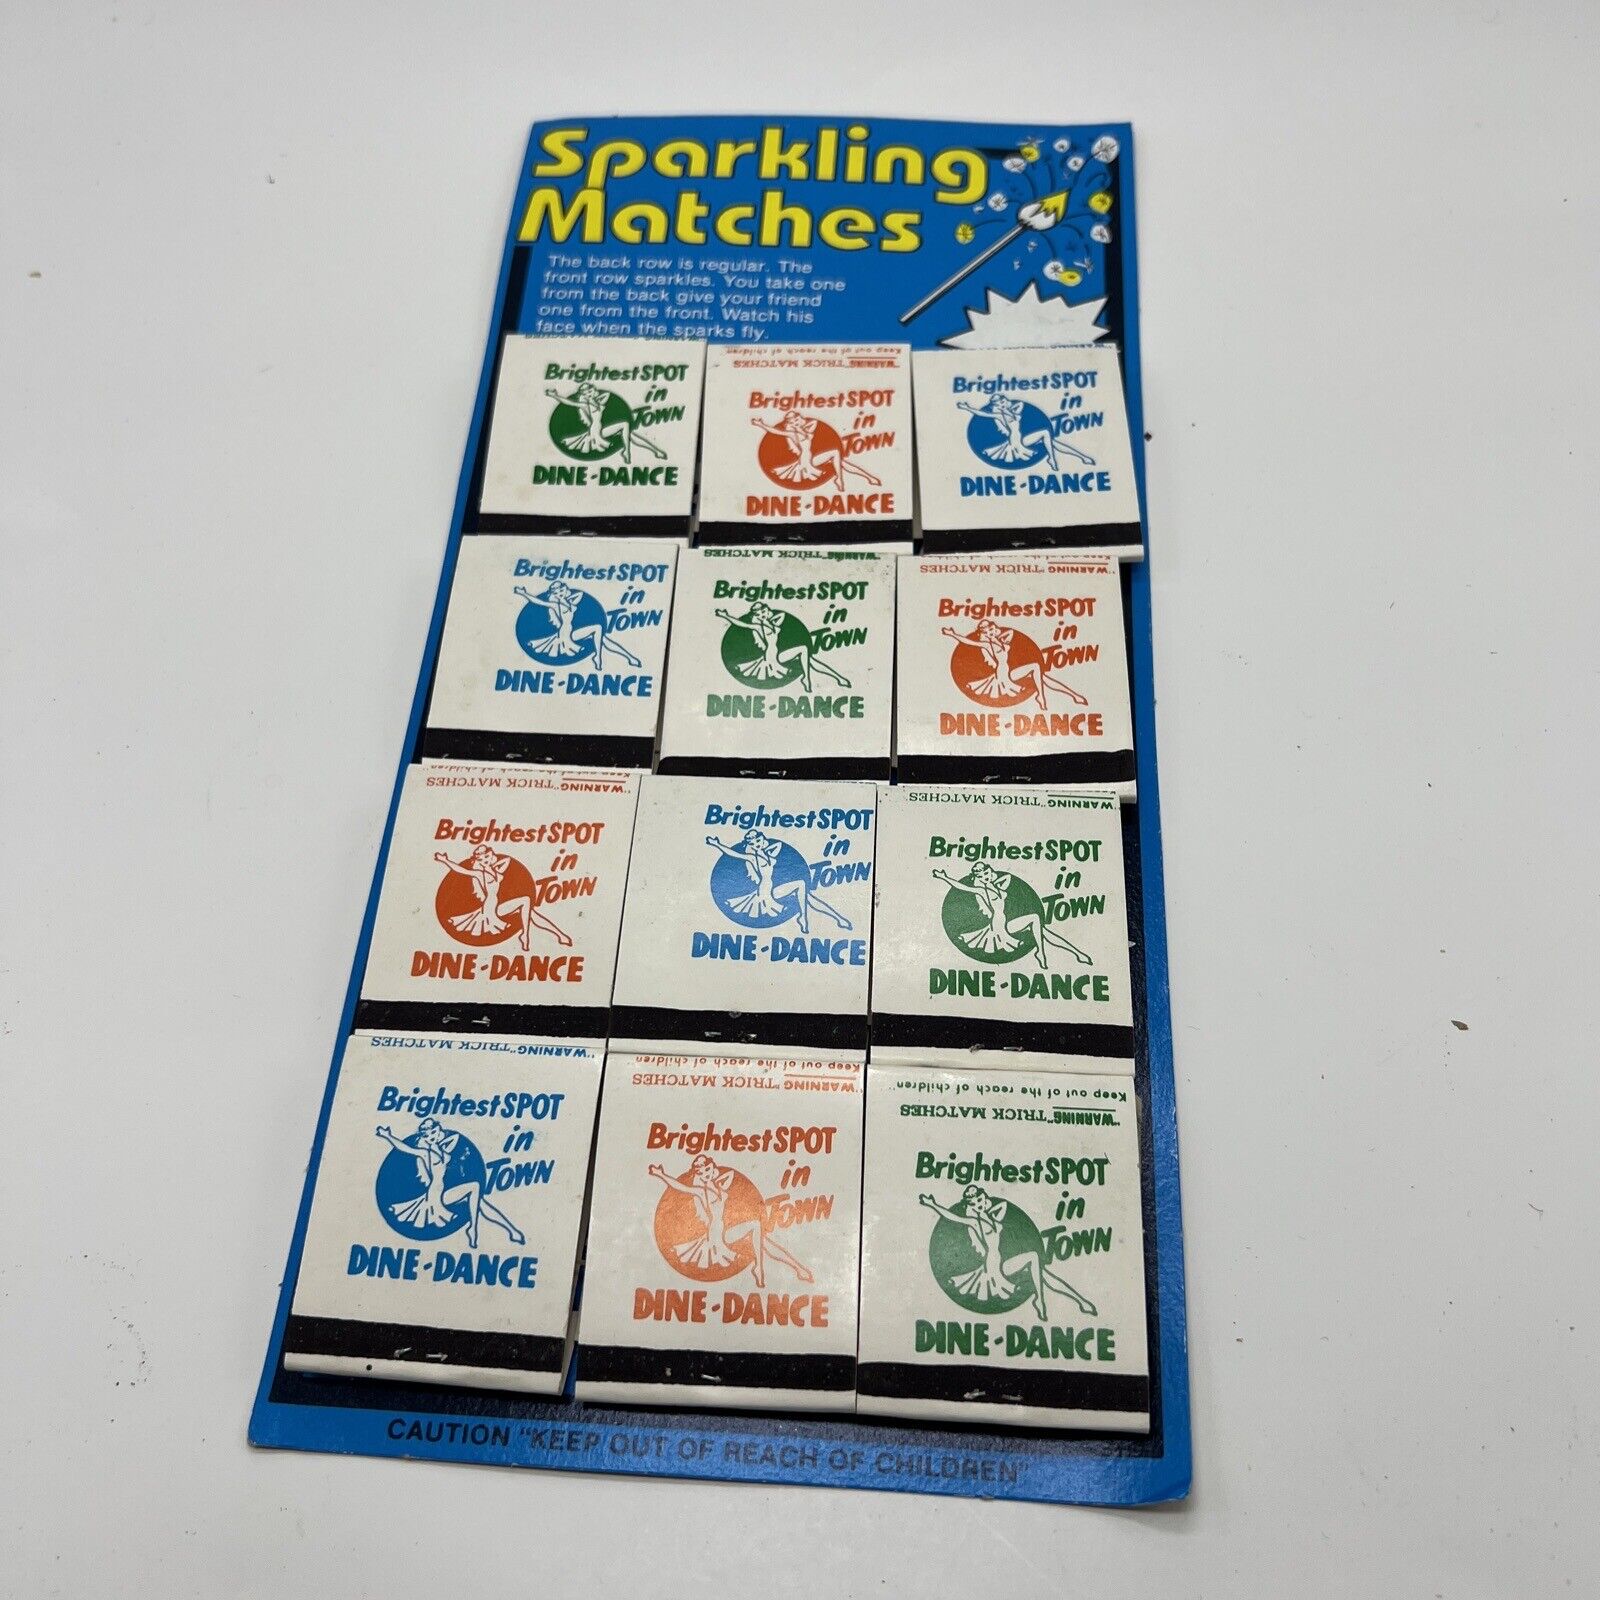 Vintage SPARKLING Matches - Store Display - Novelty Item / Trick Matches